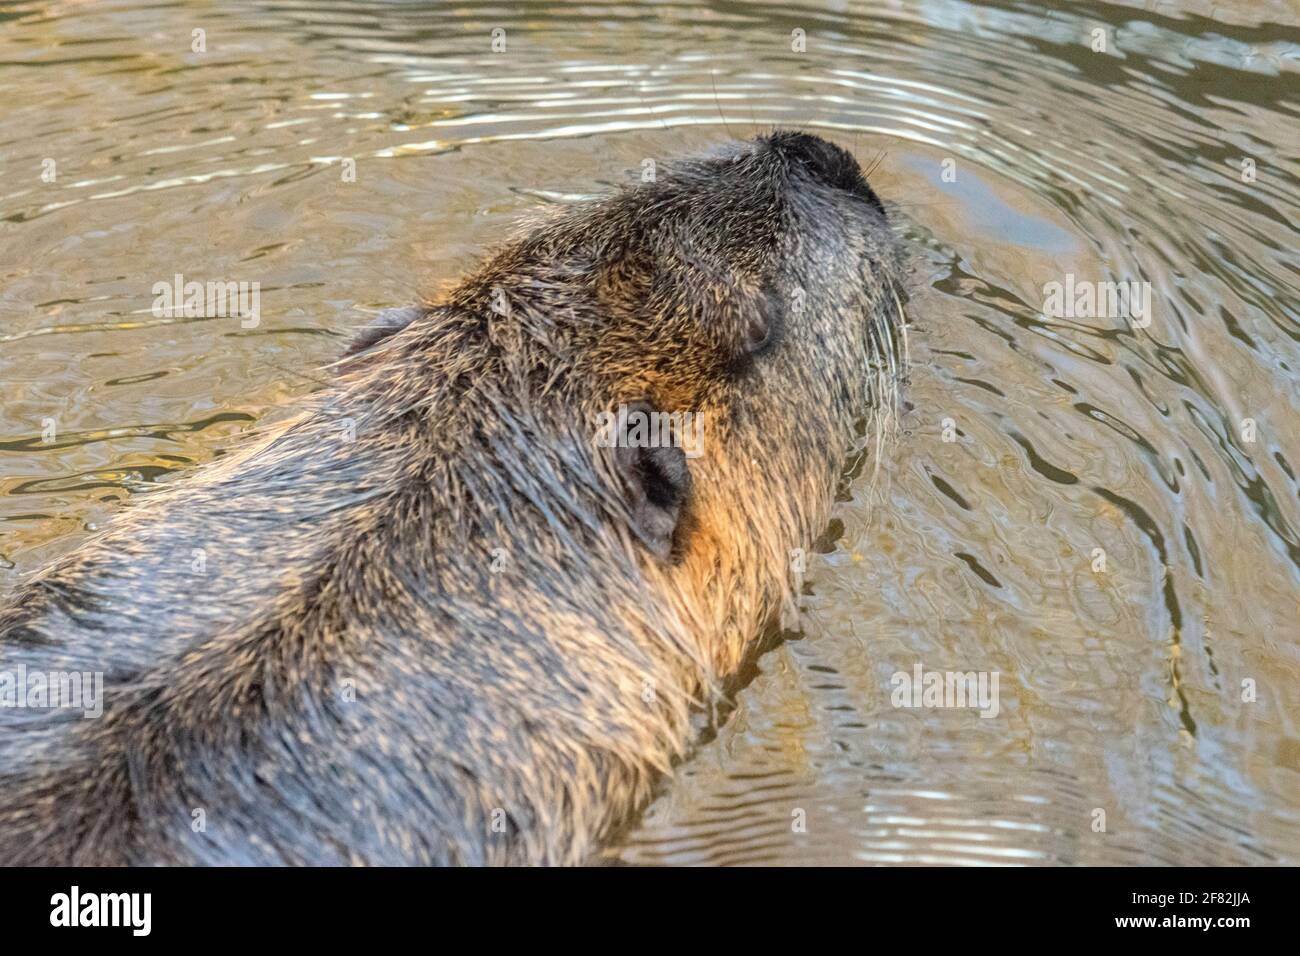 Beaver Swimming In The Water At Artis Zoo Amsterdam The Netherlands 30-12-2019 Stock Photo